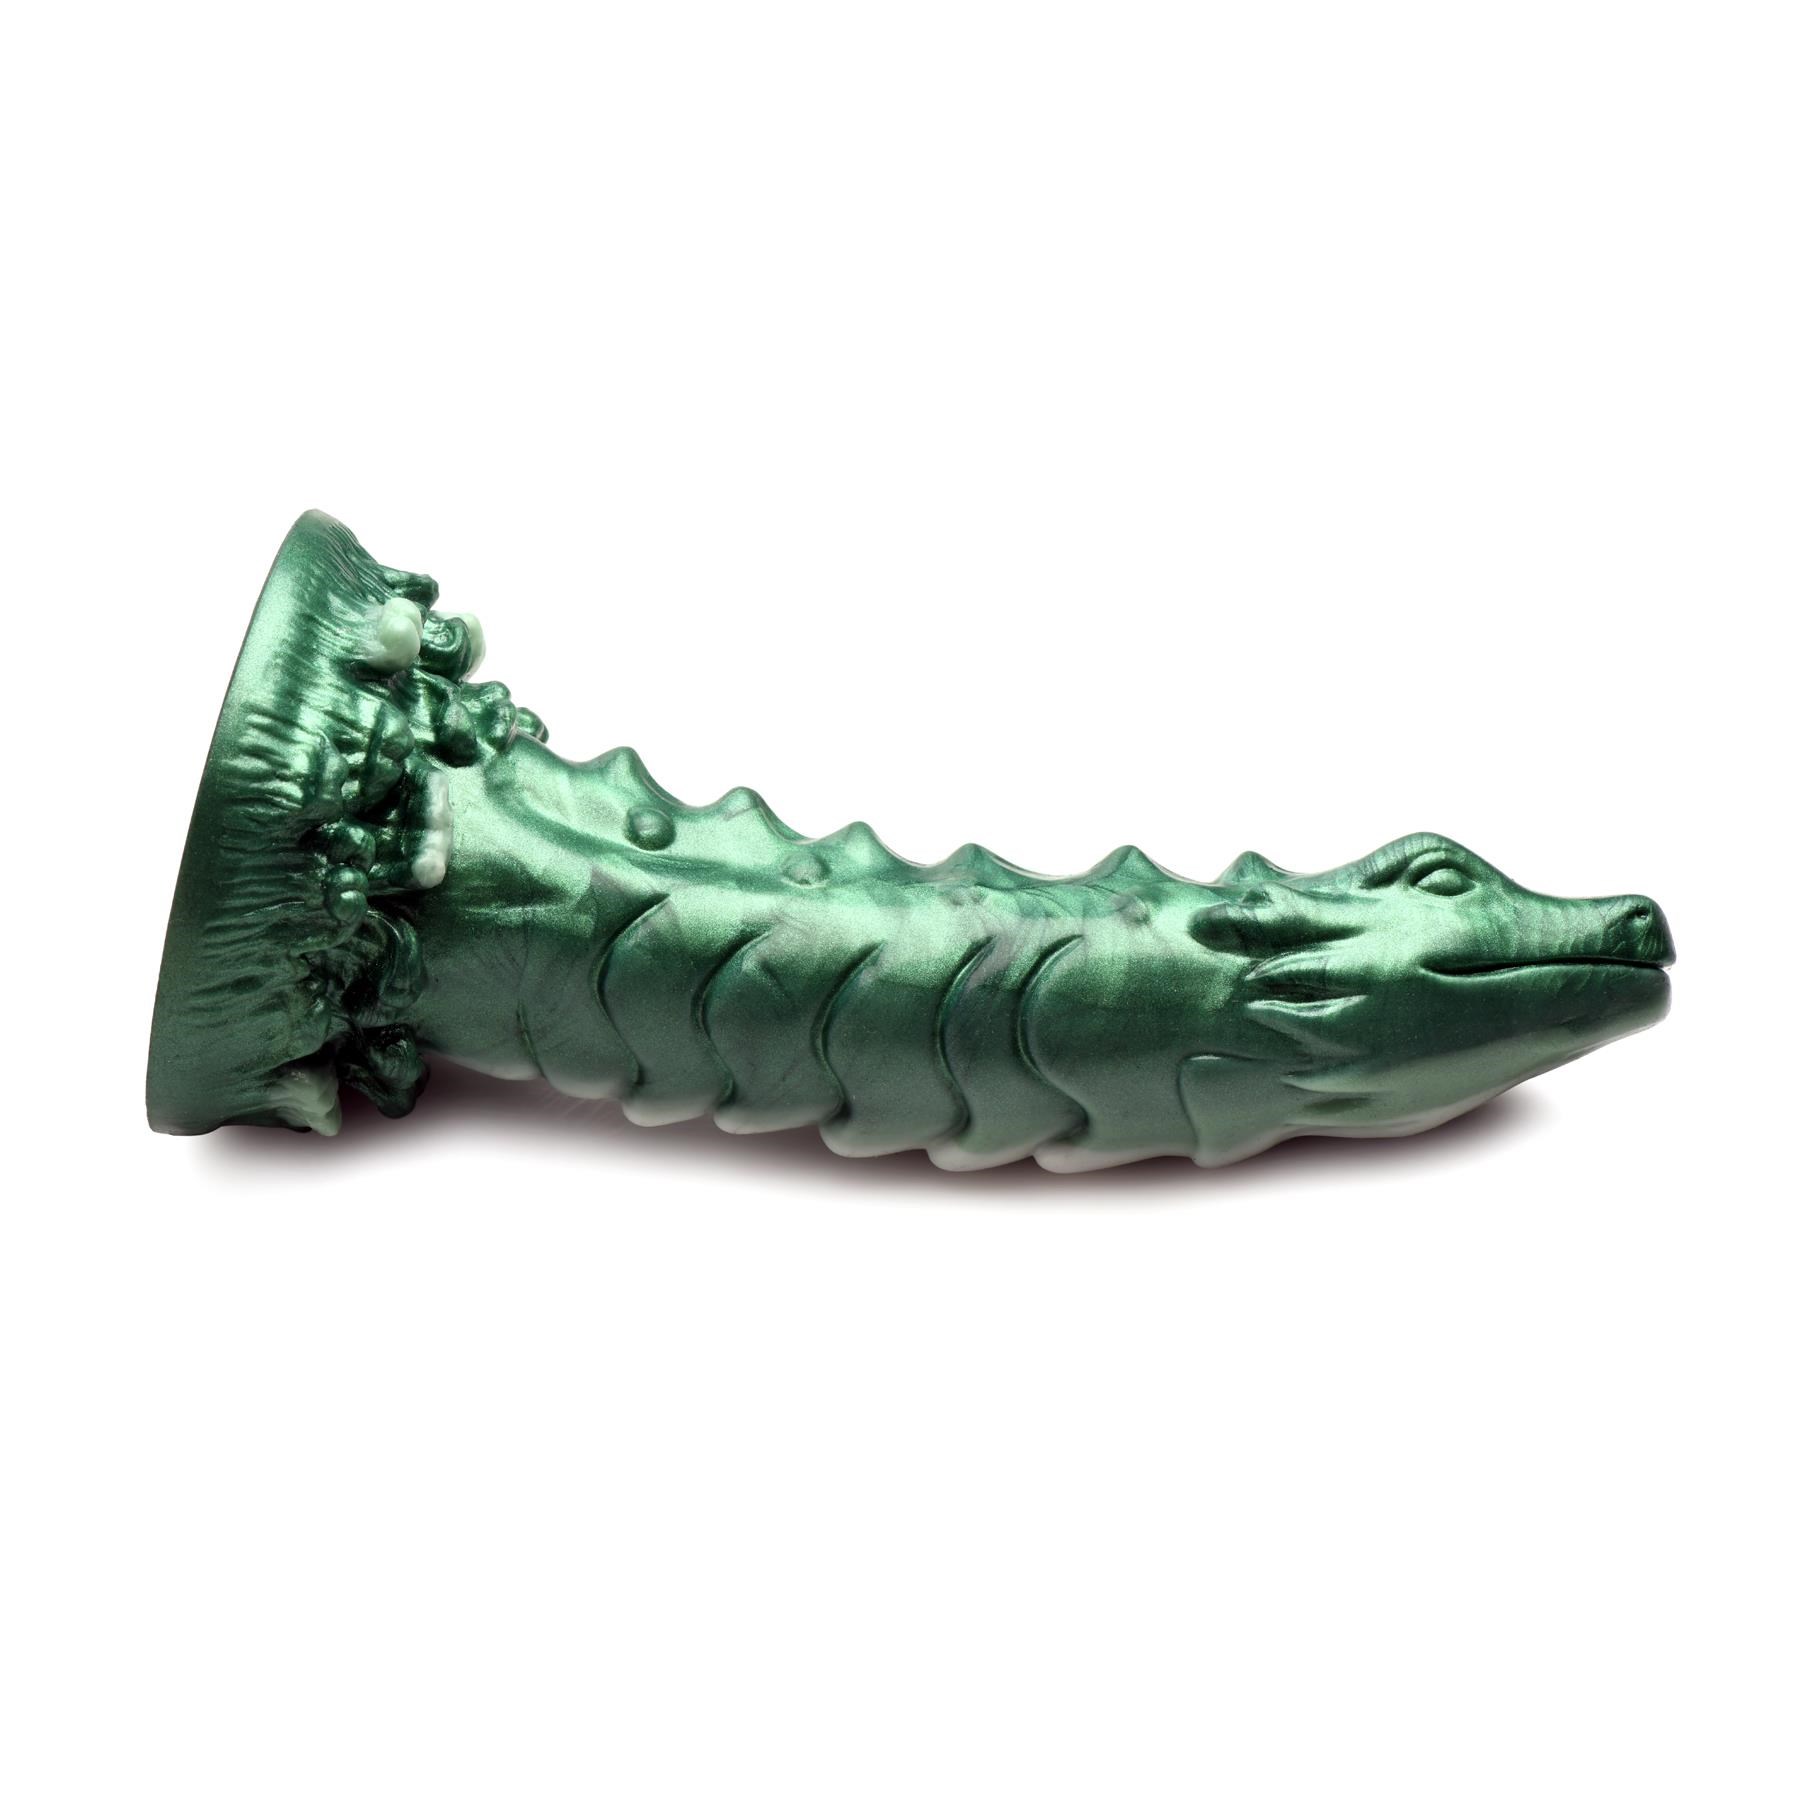 CreatureCocks Cockness Monster Silicone Dildo - Product Shot #8